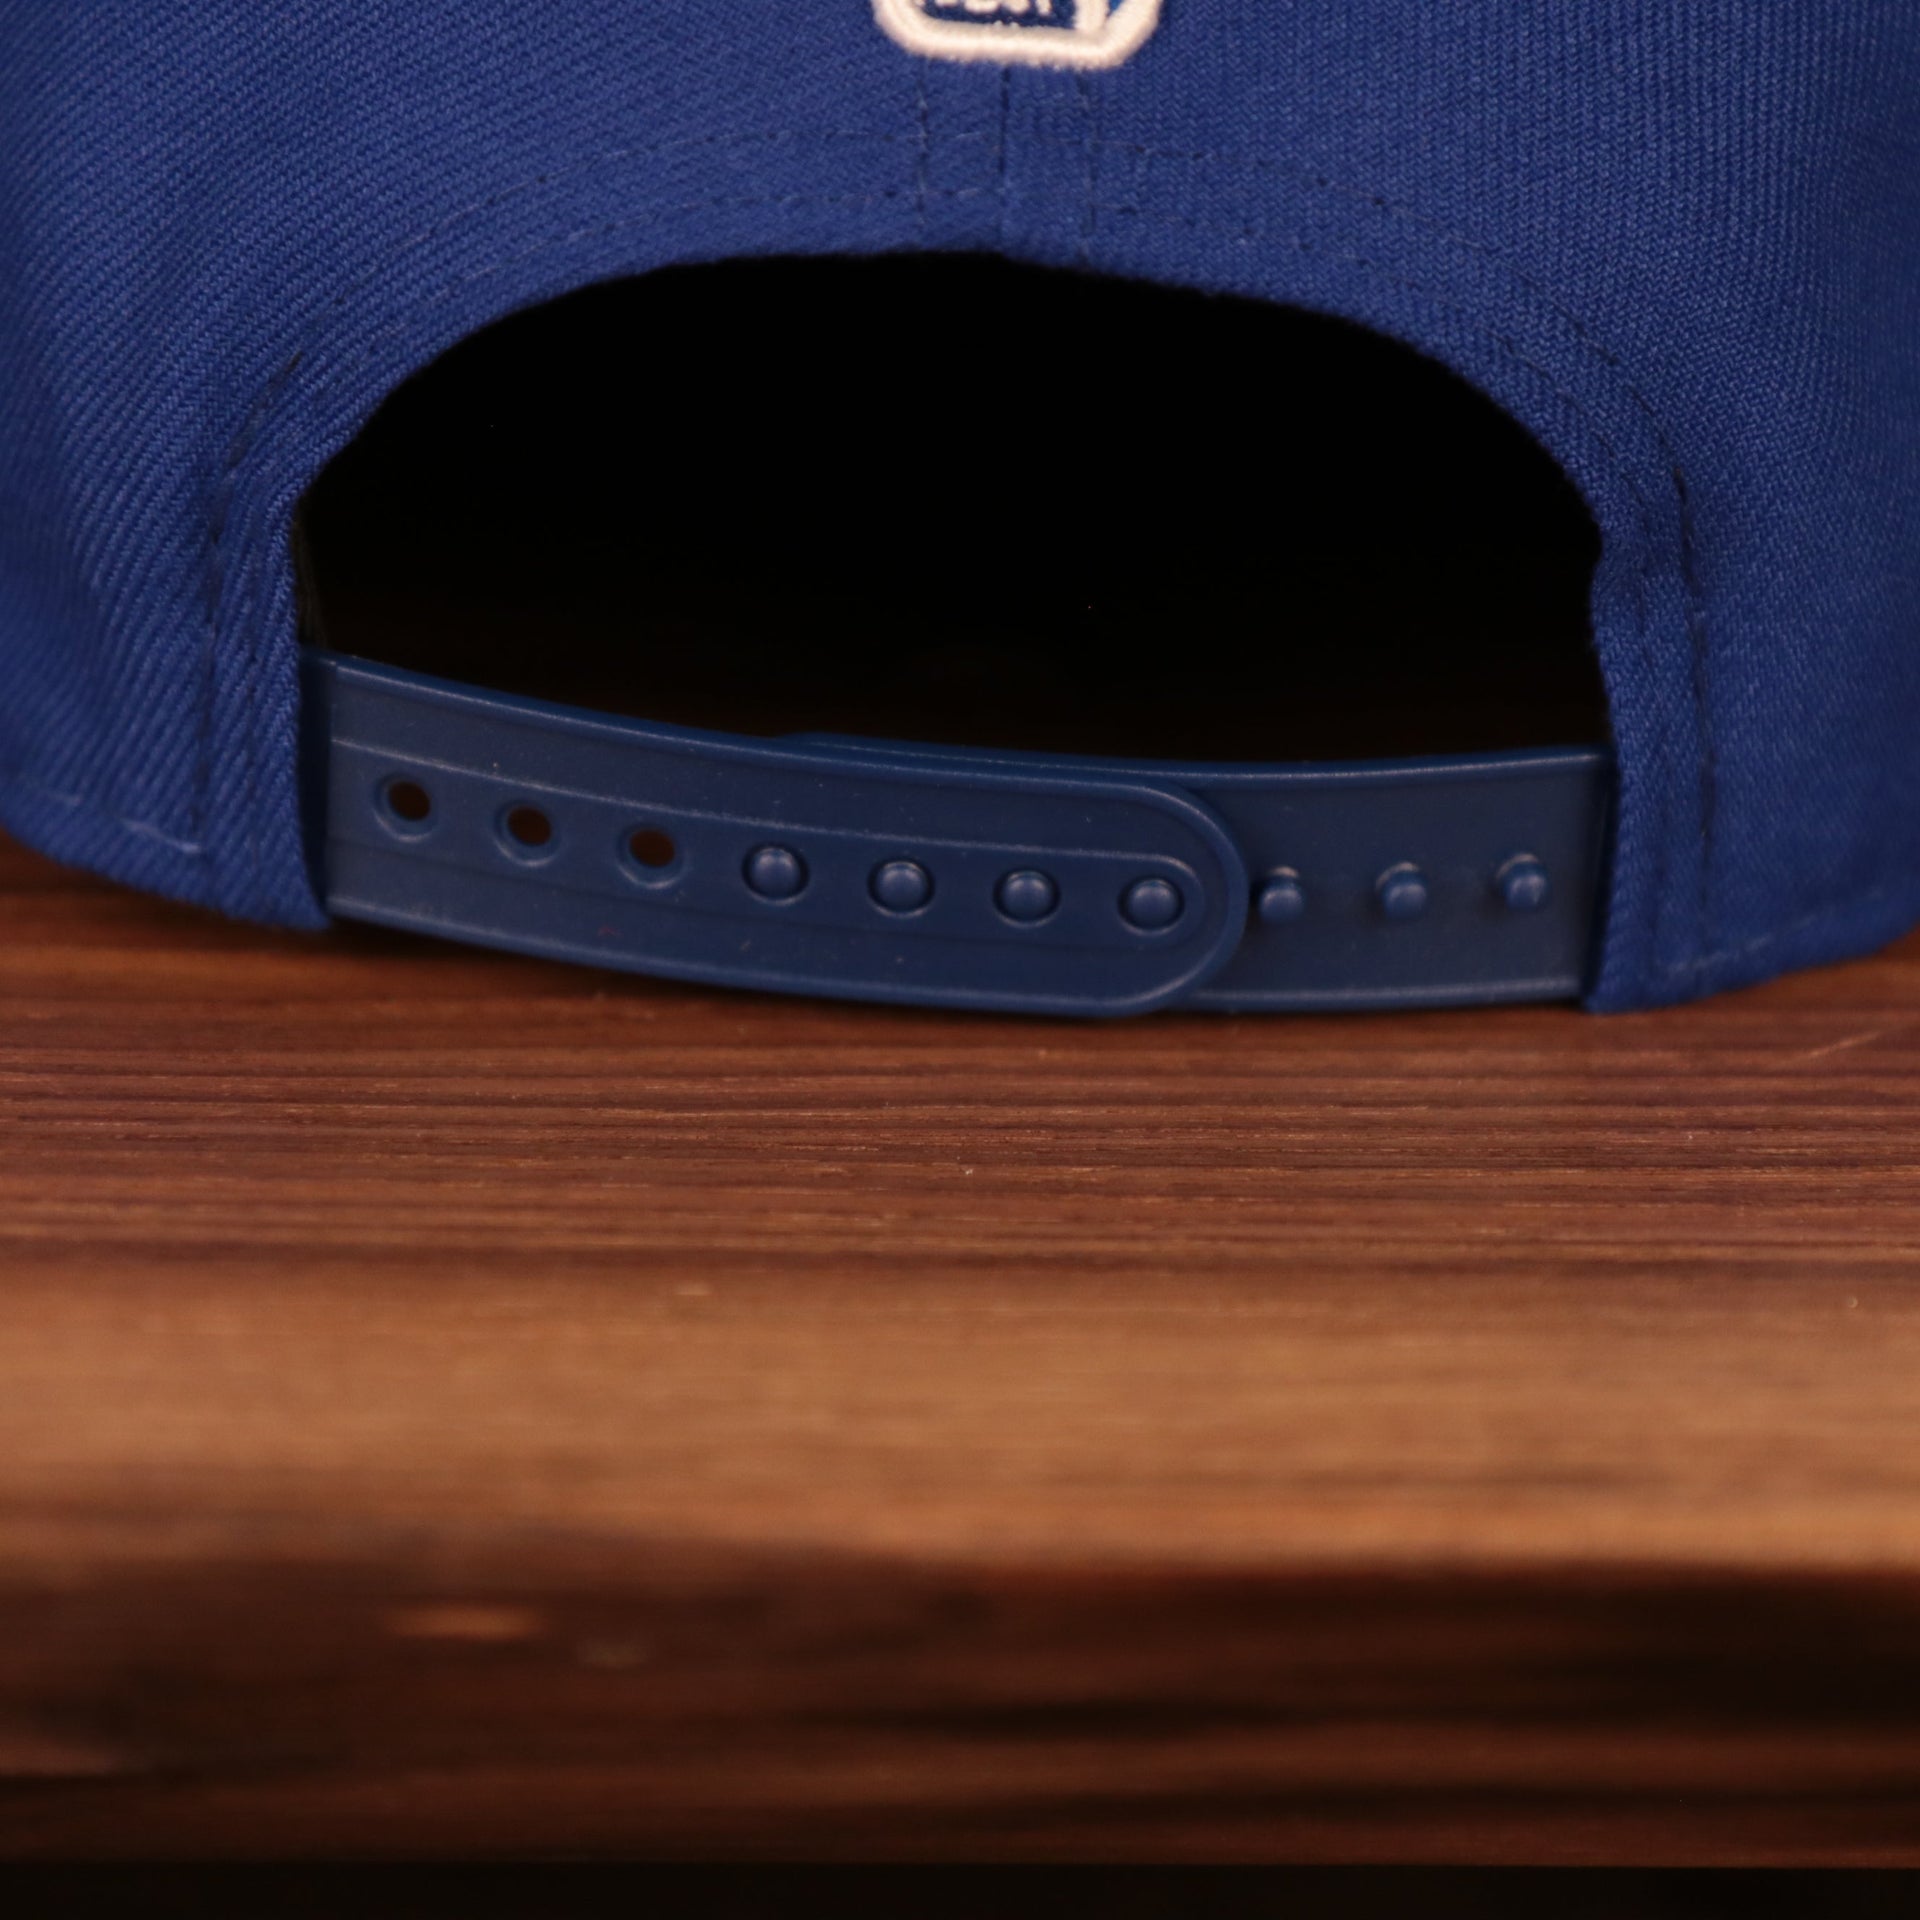 A close up shot of the adjustable snap closure found on the back of the New York Knicks 2021 NBA Playoffs snapback hat